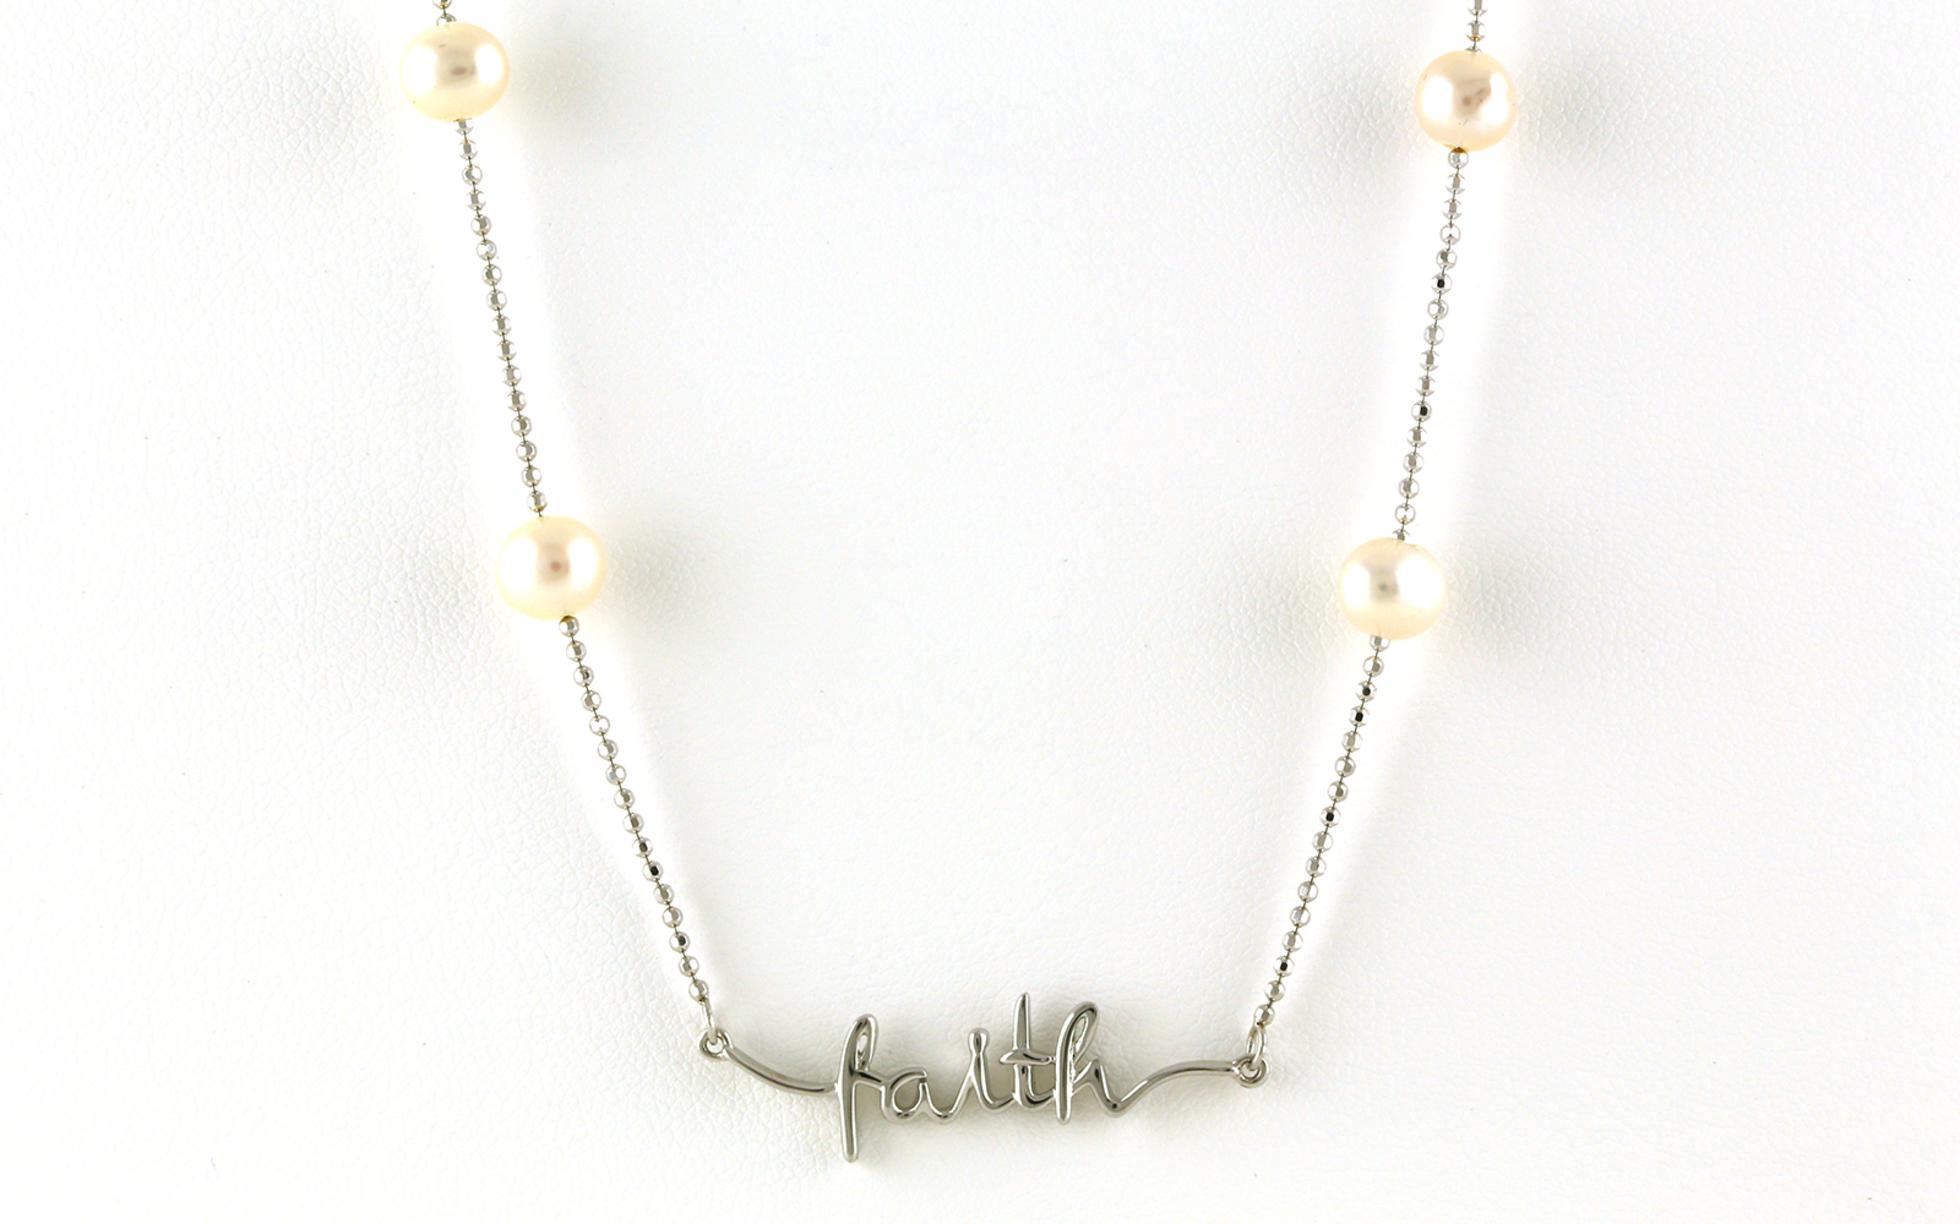 "Faith" Freshwater Pearl Station Necklace in Sterling Silver (6 - 7mm)